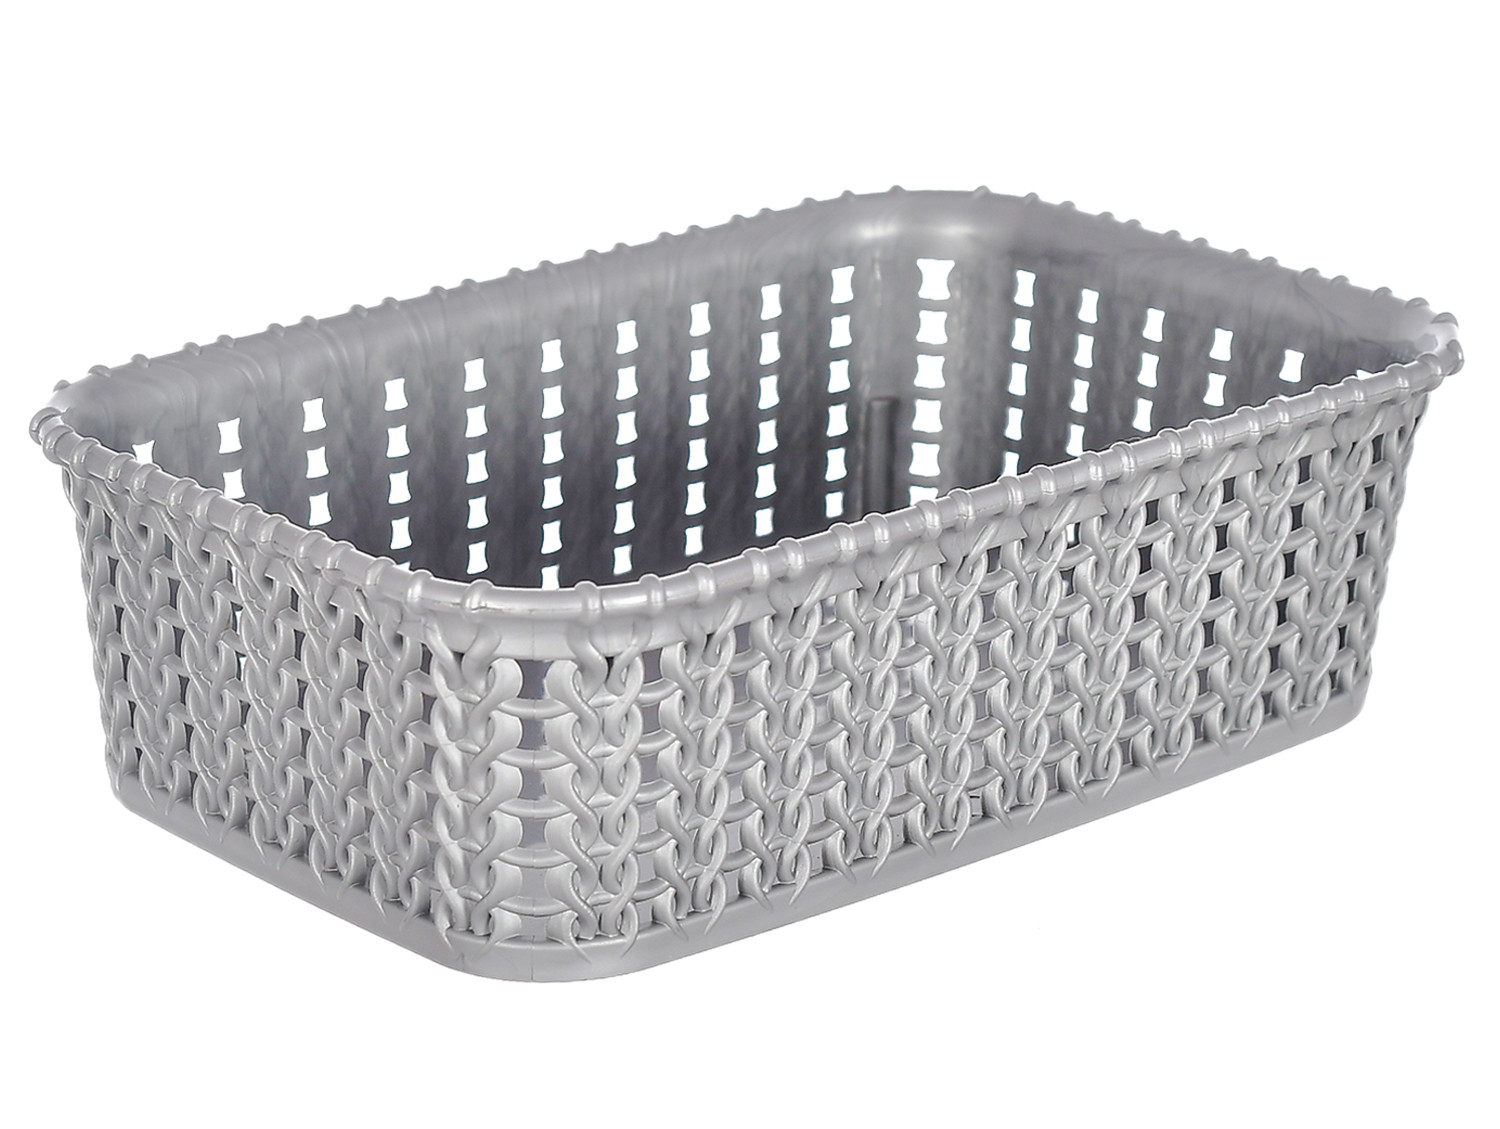 Kuber Industries Multiuses Small M 15 Plastic Tray/Basket/Organizer Without Lid- Pack of 3 (Grey & Brown & Grey) -46KM0127